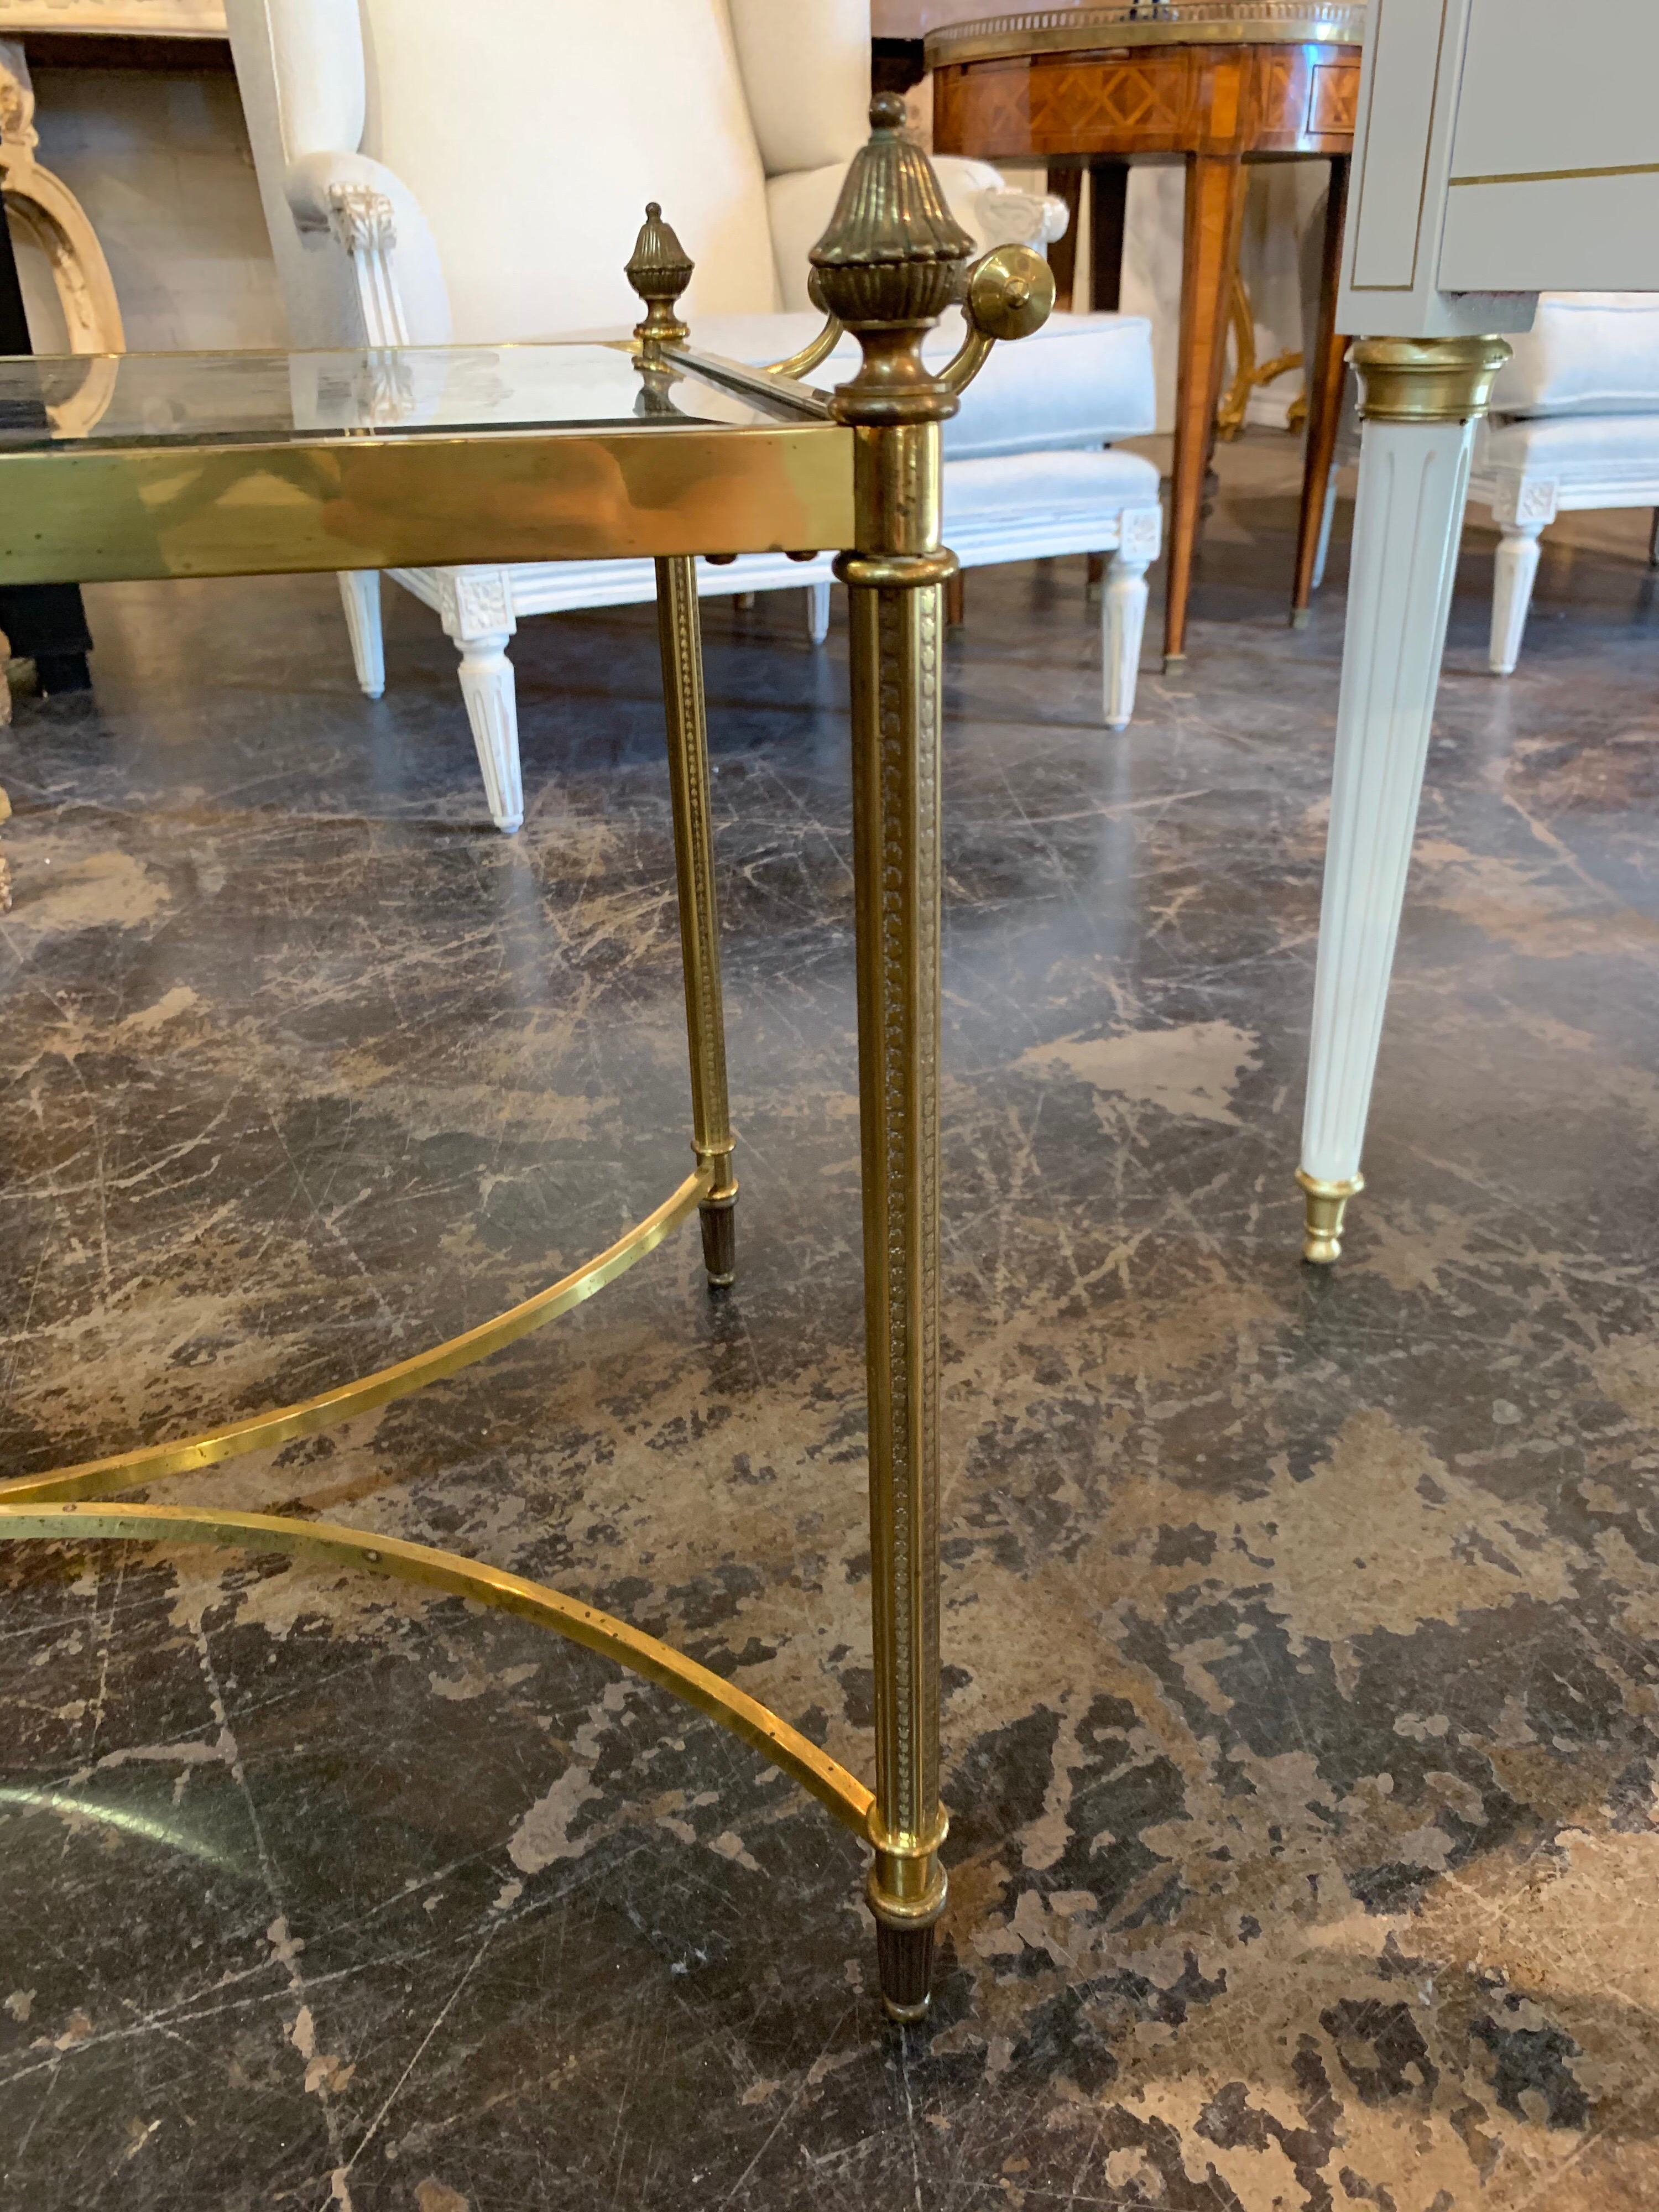 Very fine 1940s Jansen style brass cocktail with glass top. This table has nice details including finials at the corners. Creates a Classic look!